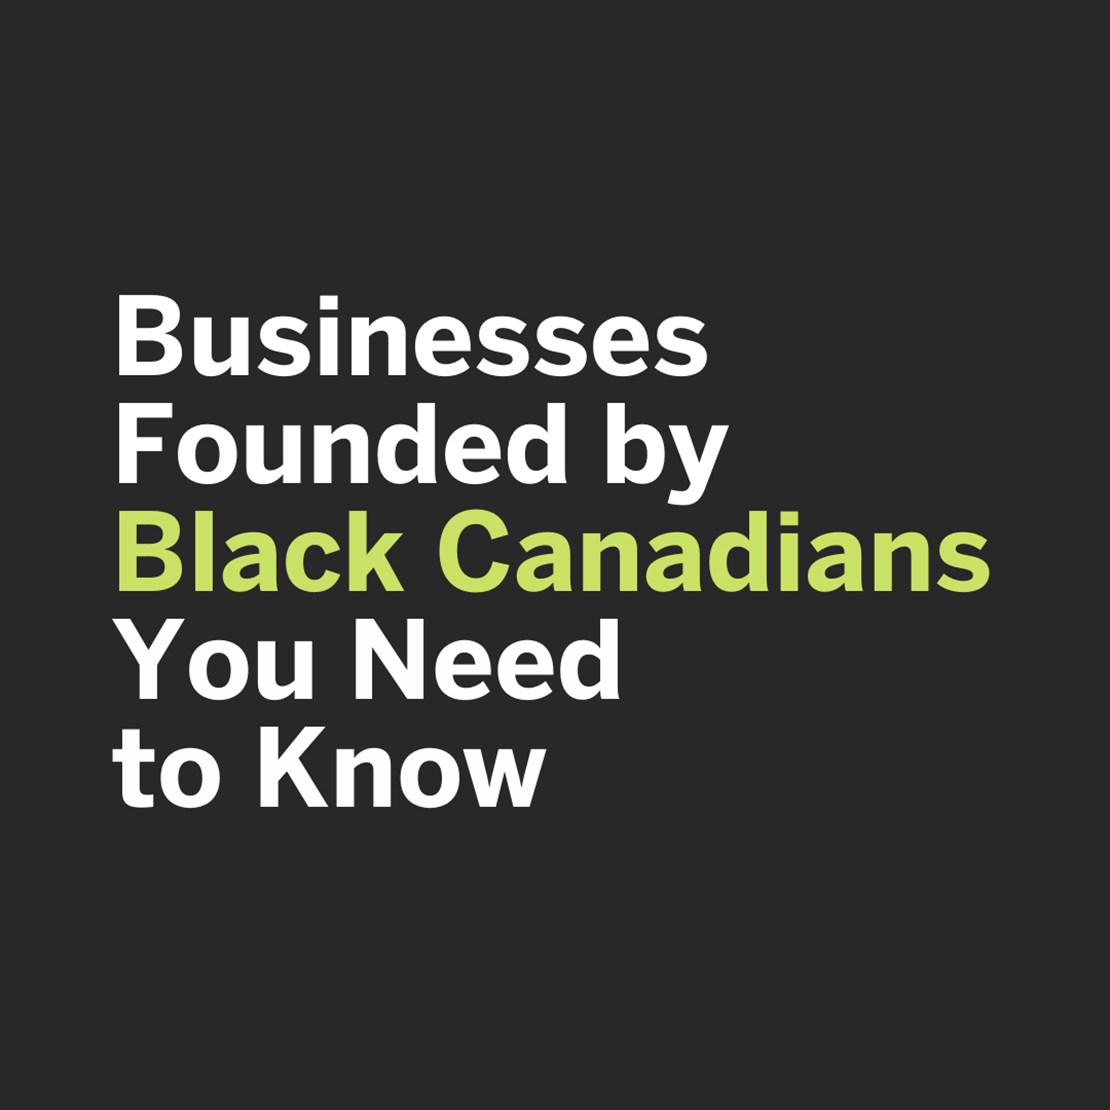 Businesses Founded by Black Canadians